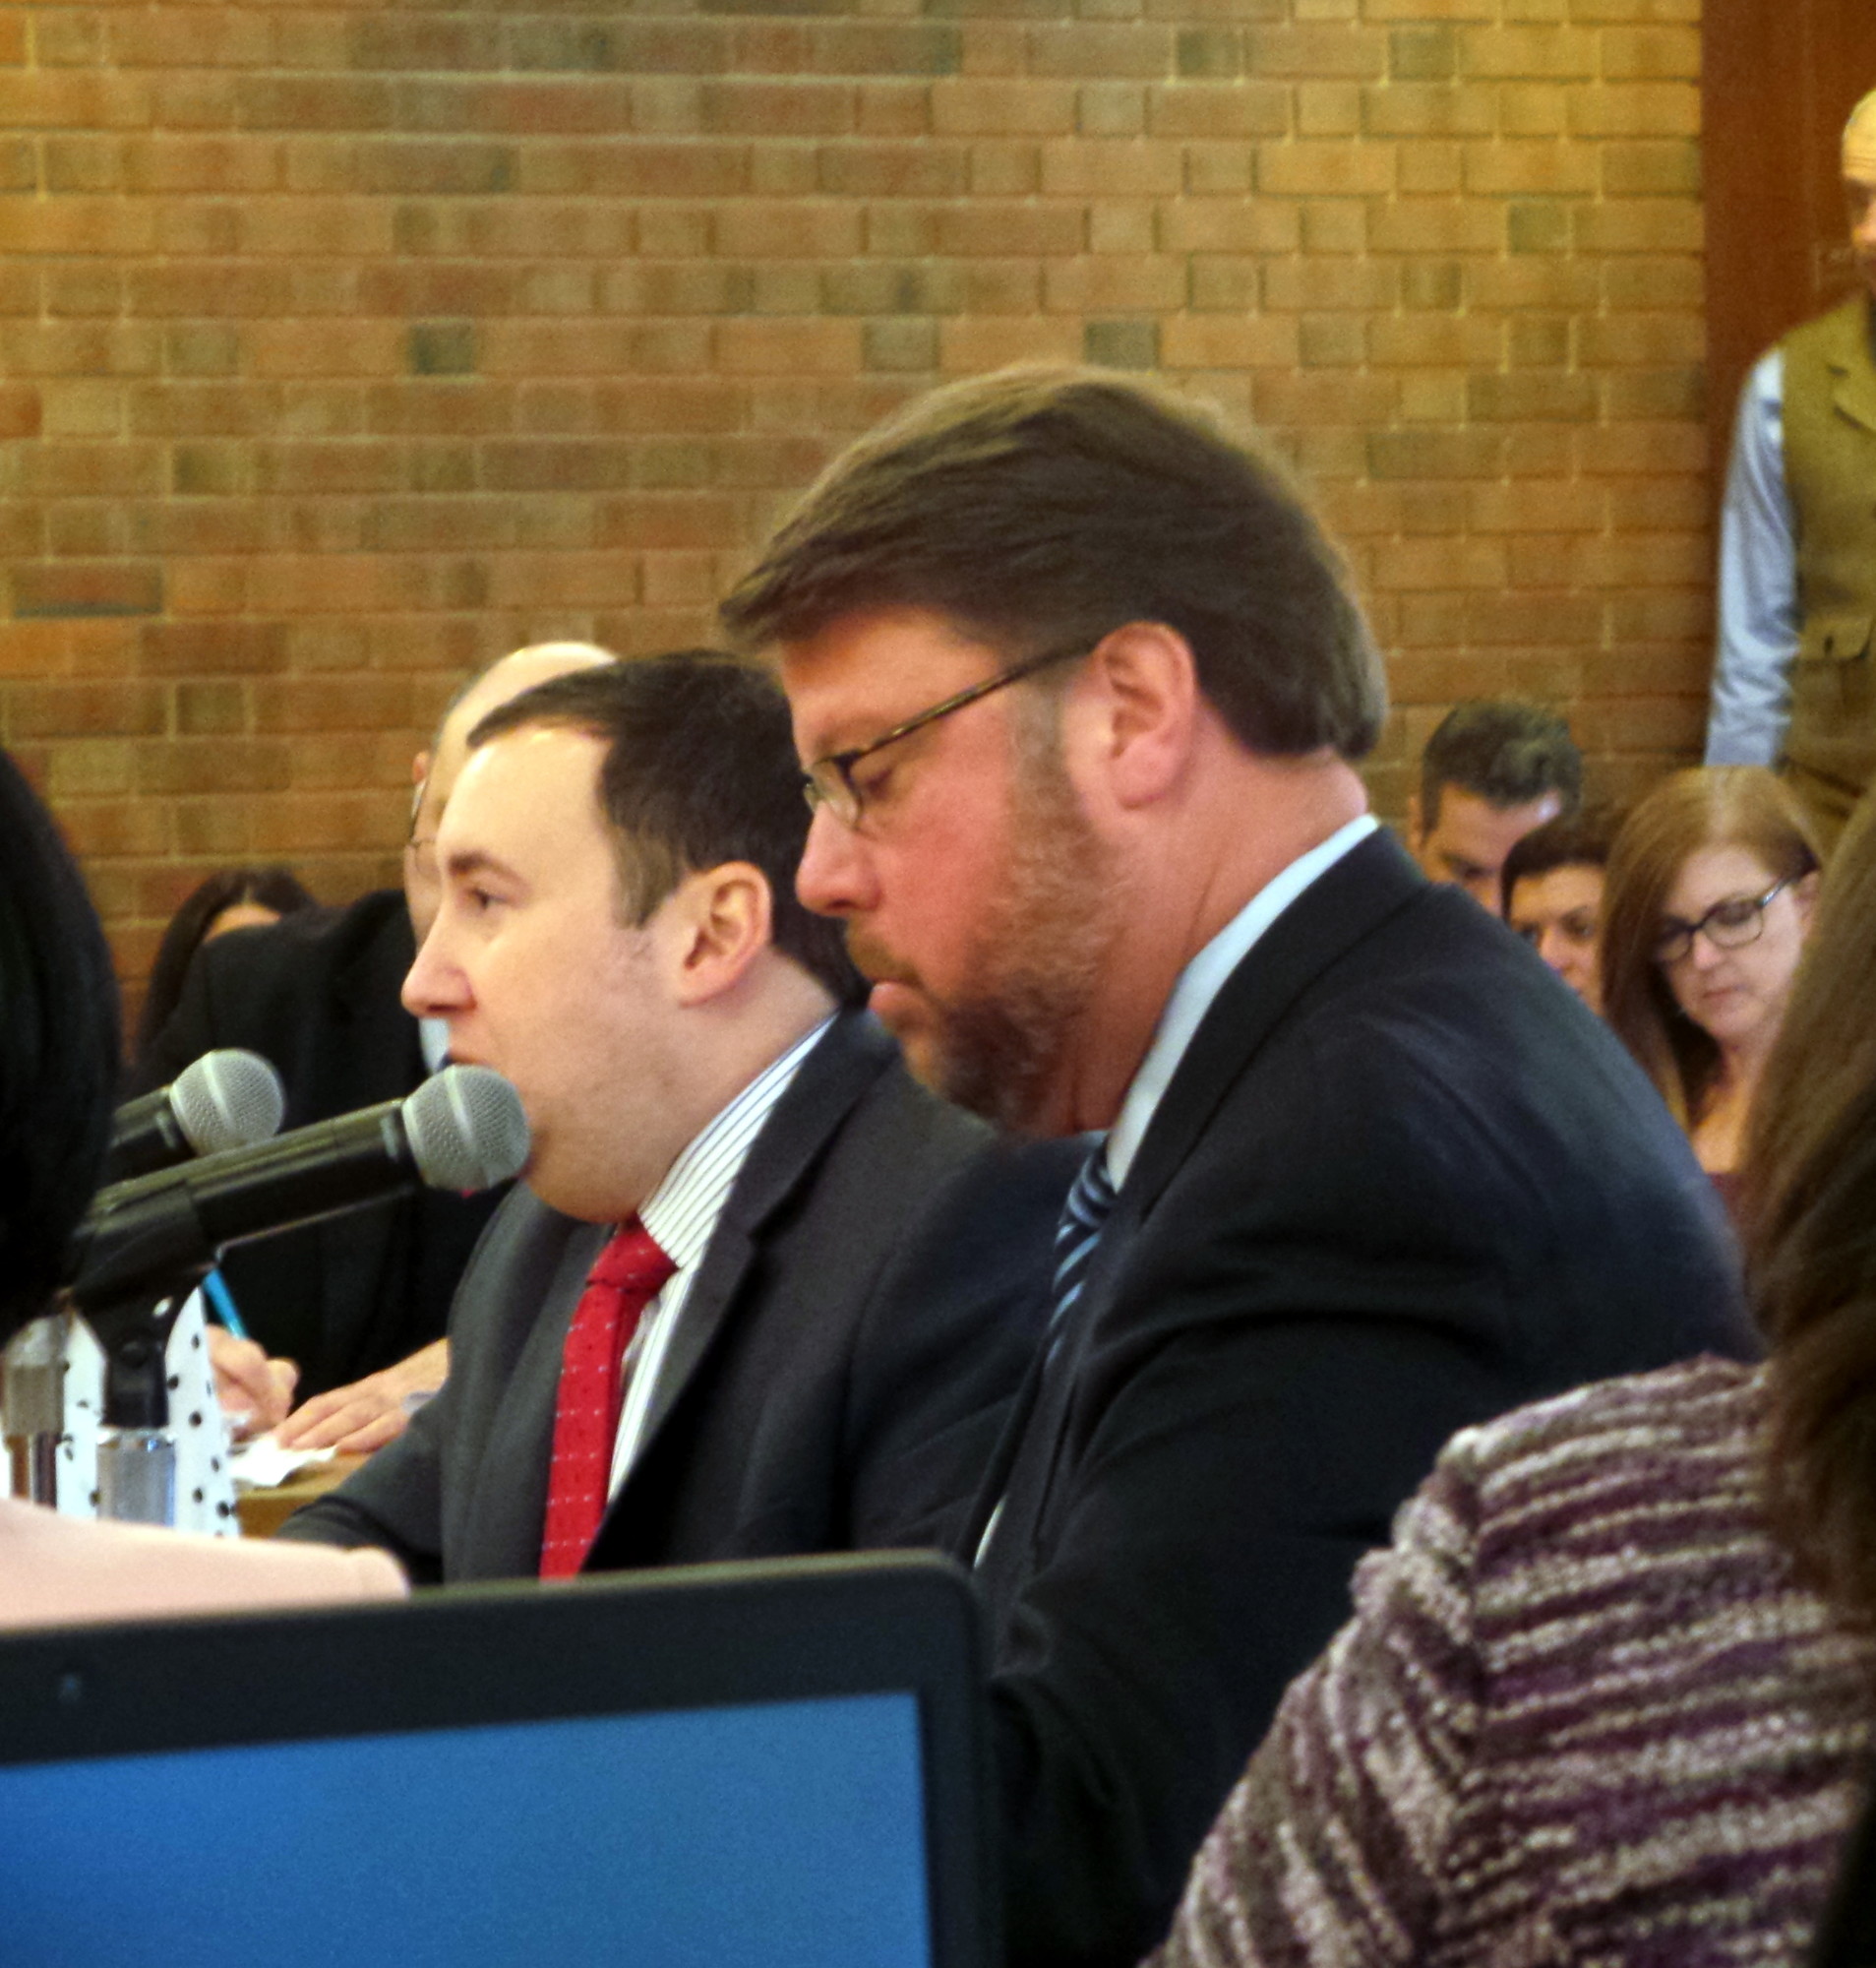 R&B Acquisitions & Development’s lawyer, Dominick Minerva, near right, discussed the developer’s proposed plan.